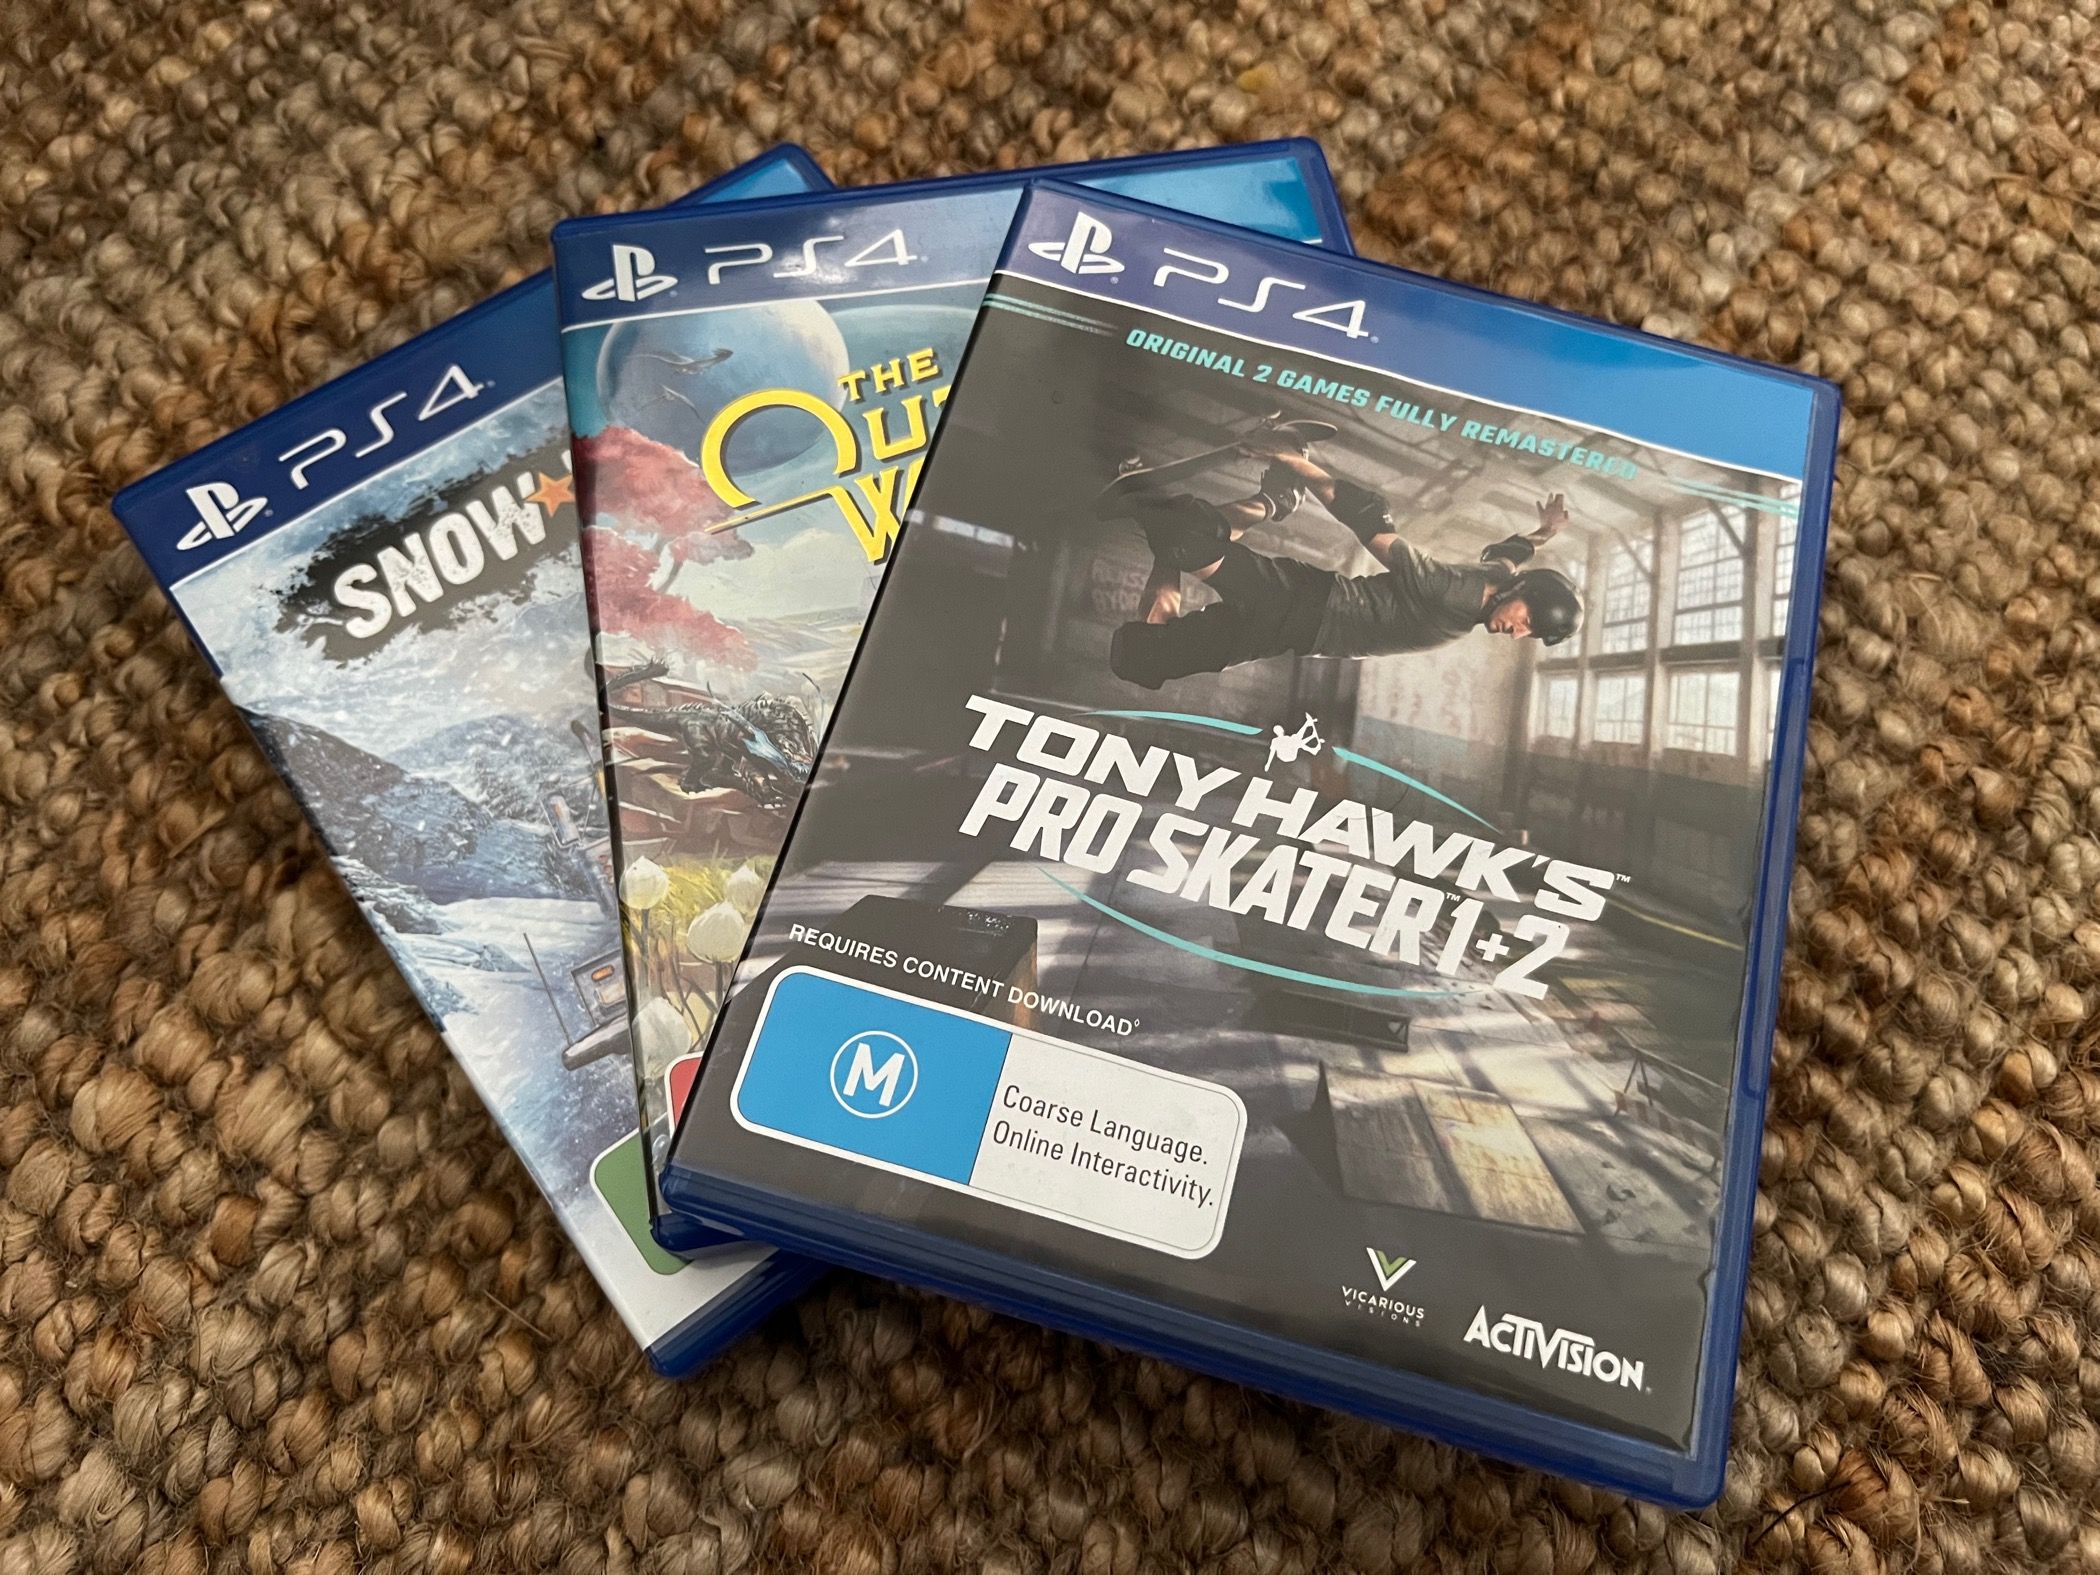 A selection of PS4 disc games: Snowrunner, The Outer Wilds, Tony Hawk's Pro Skater 1+2